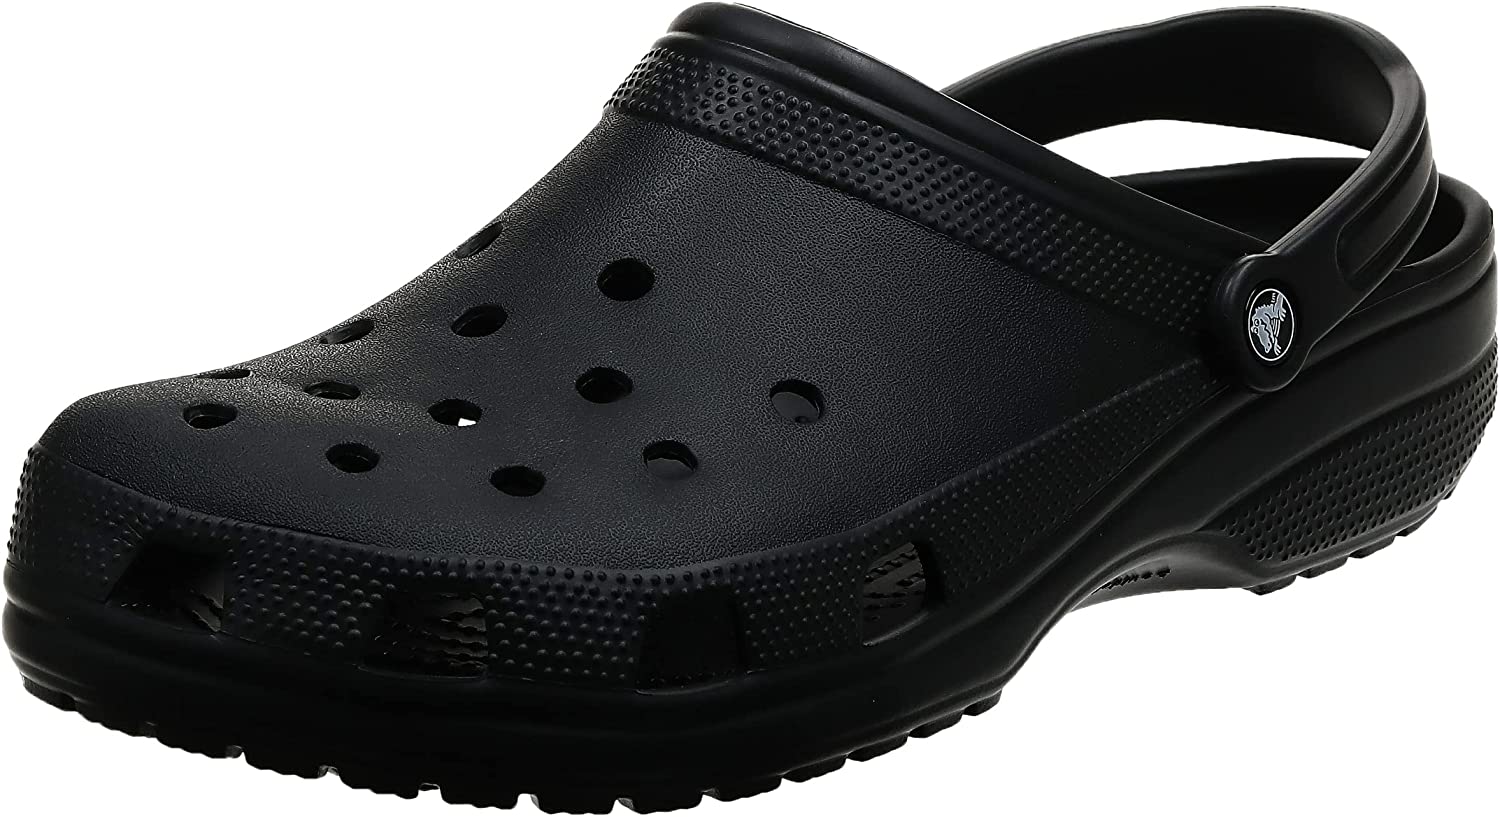 Why Are Crocs so Expensive? Here are the Reasons